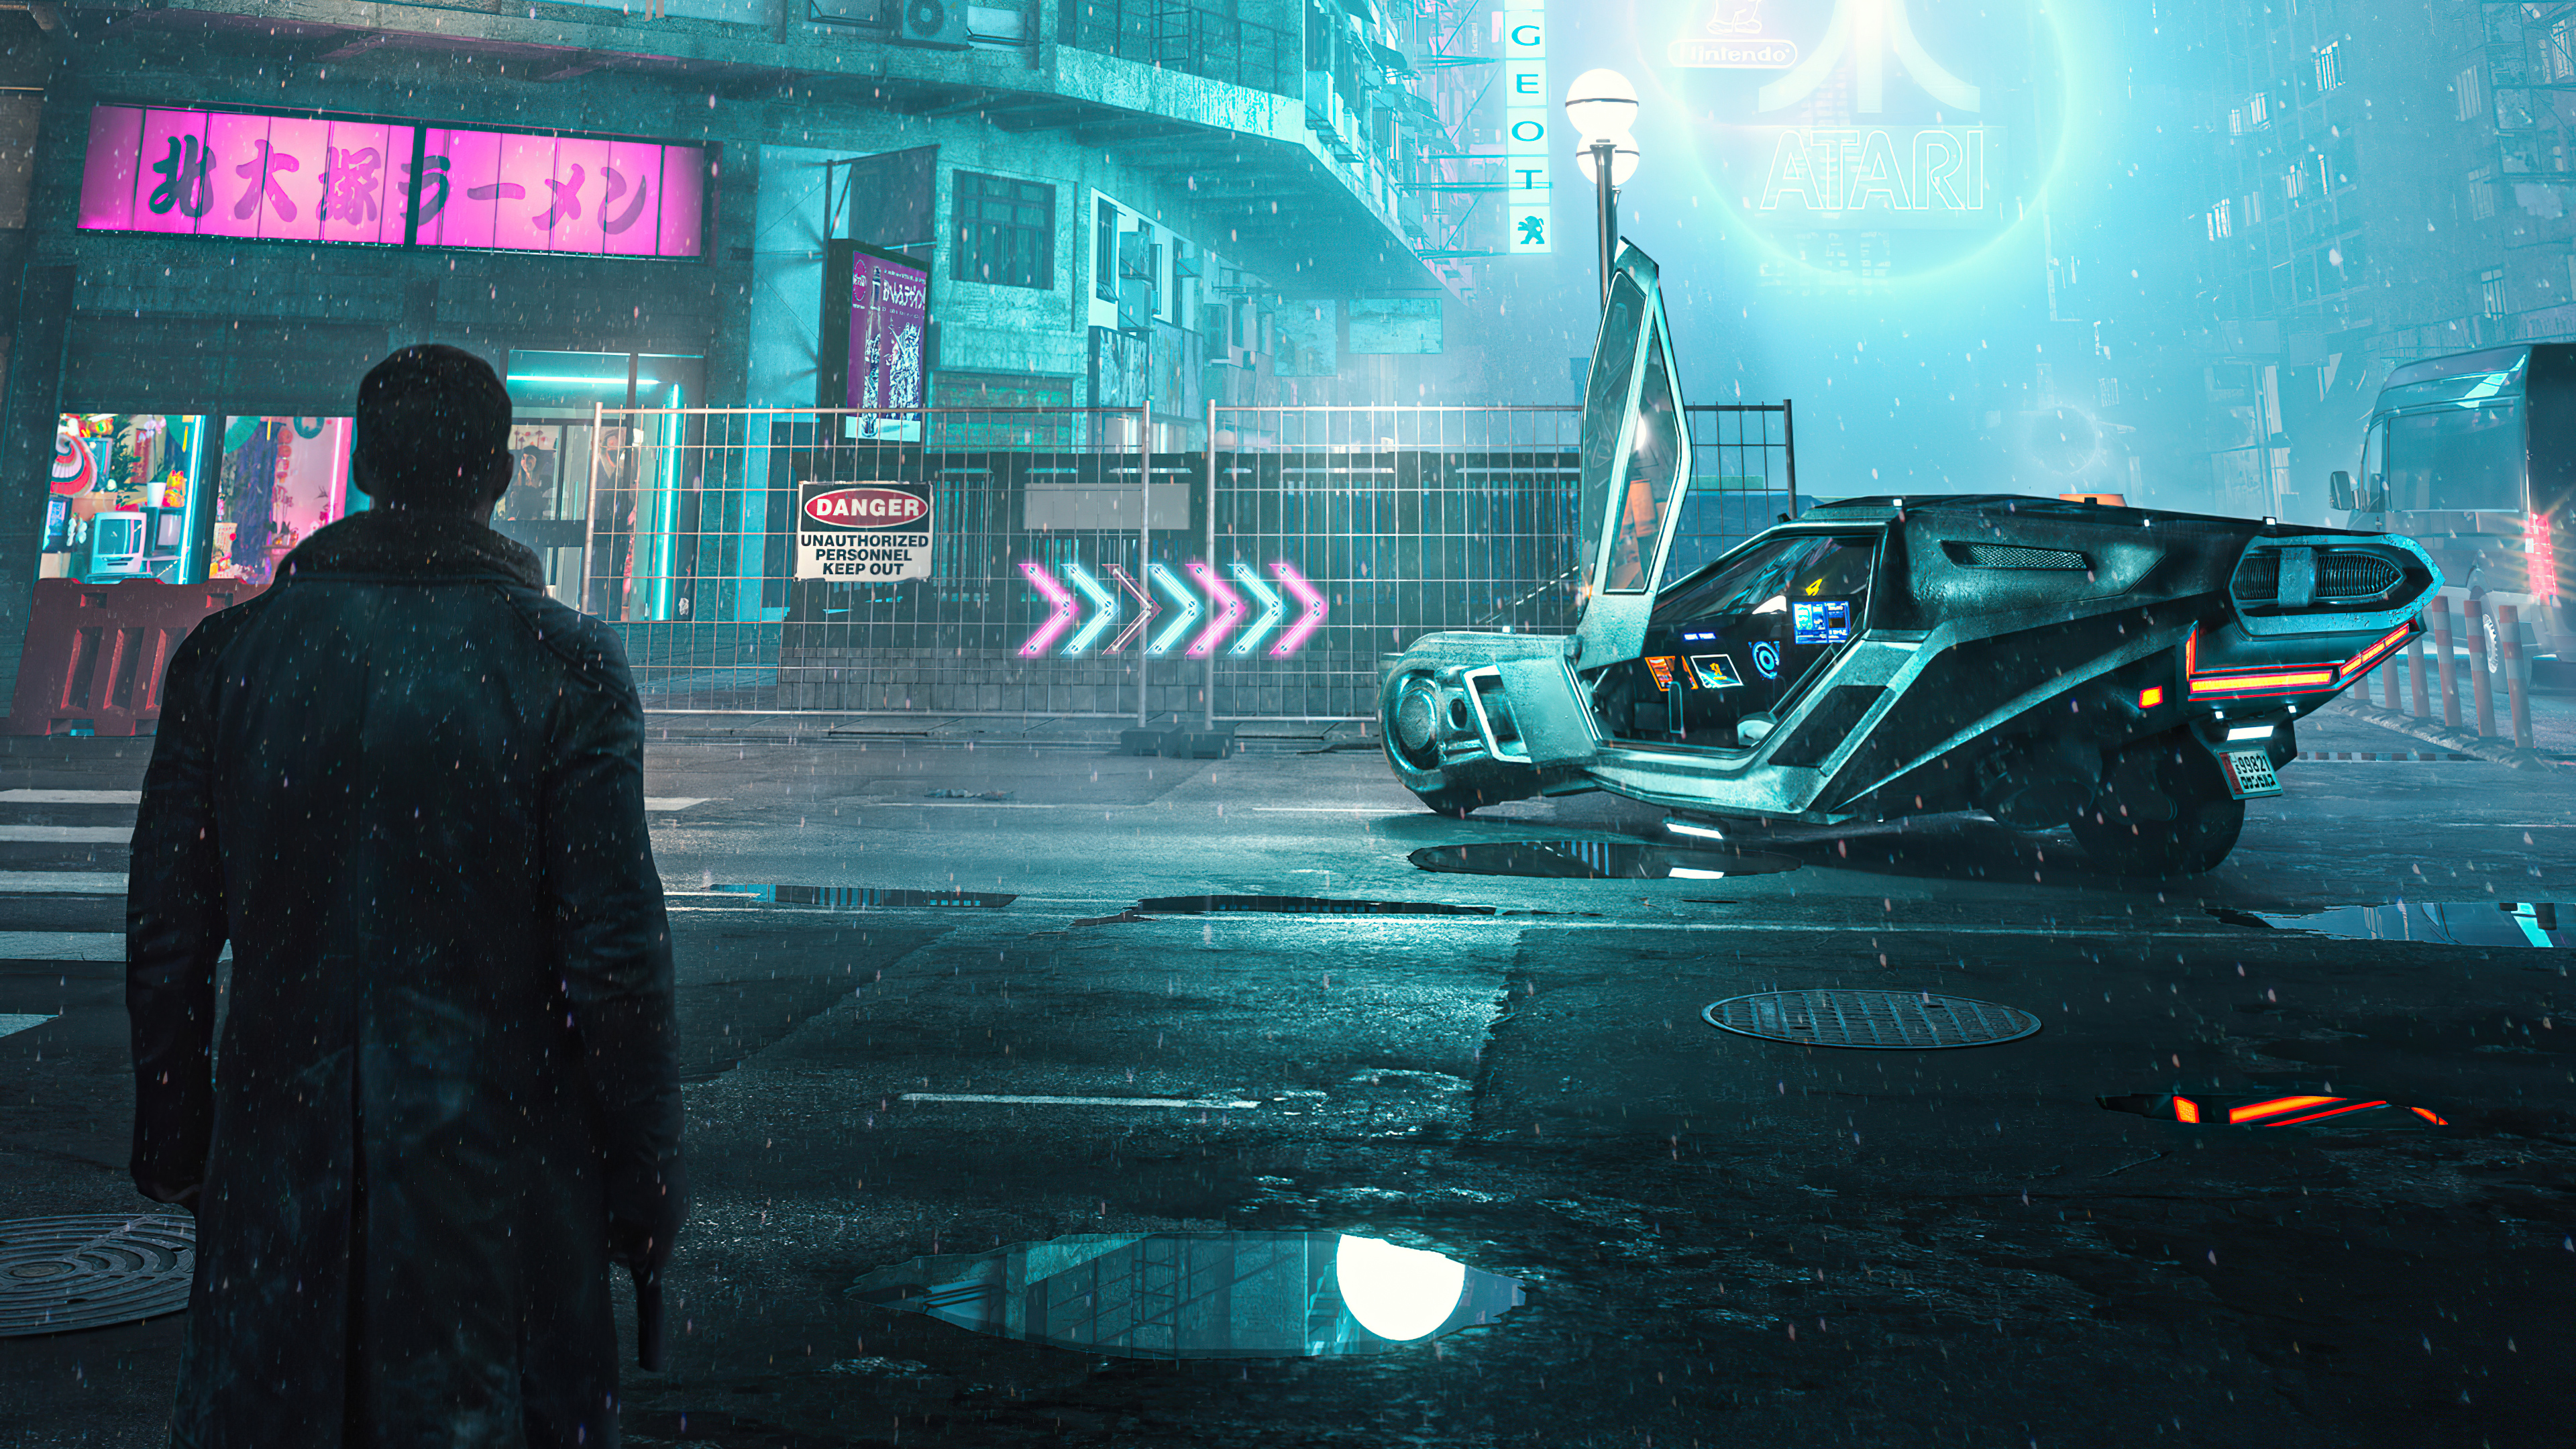 Download Blade Runner 2049 wallpapers for mobile phone free Blade Runner  2049 HD pictures